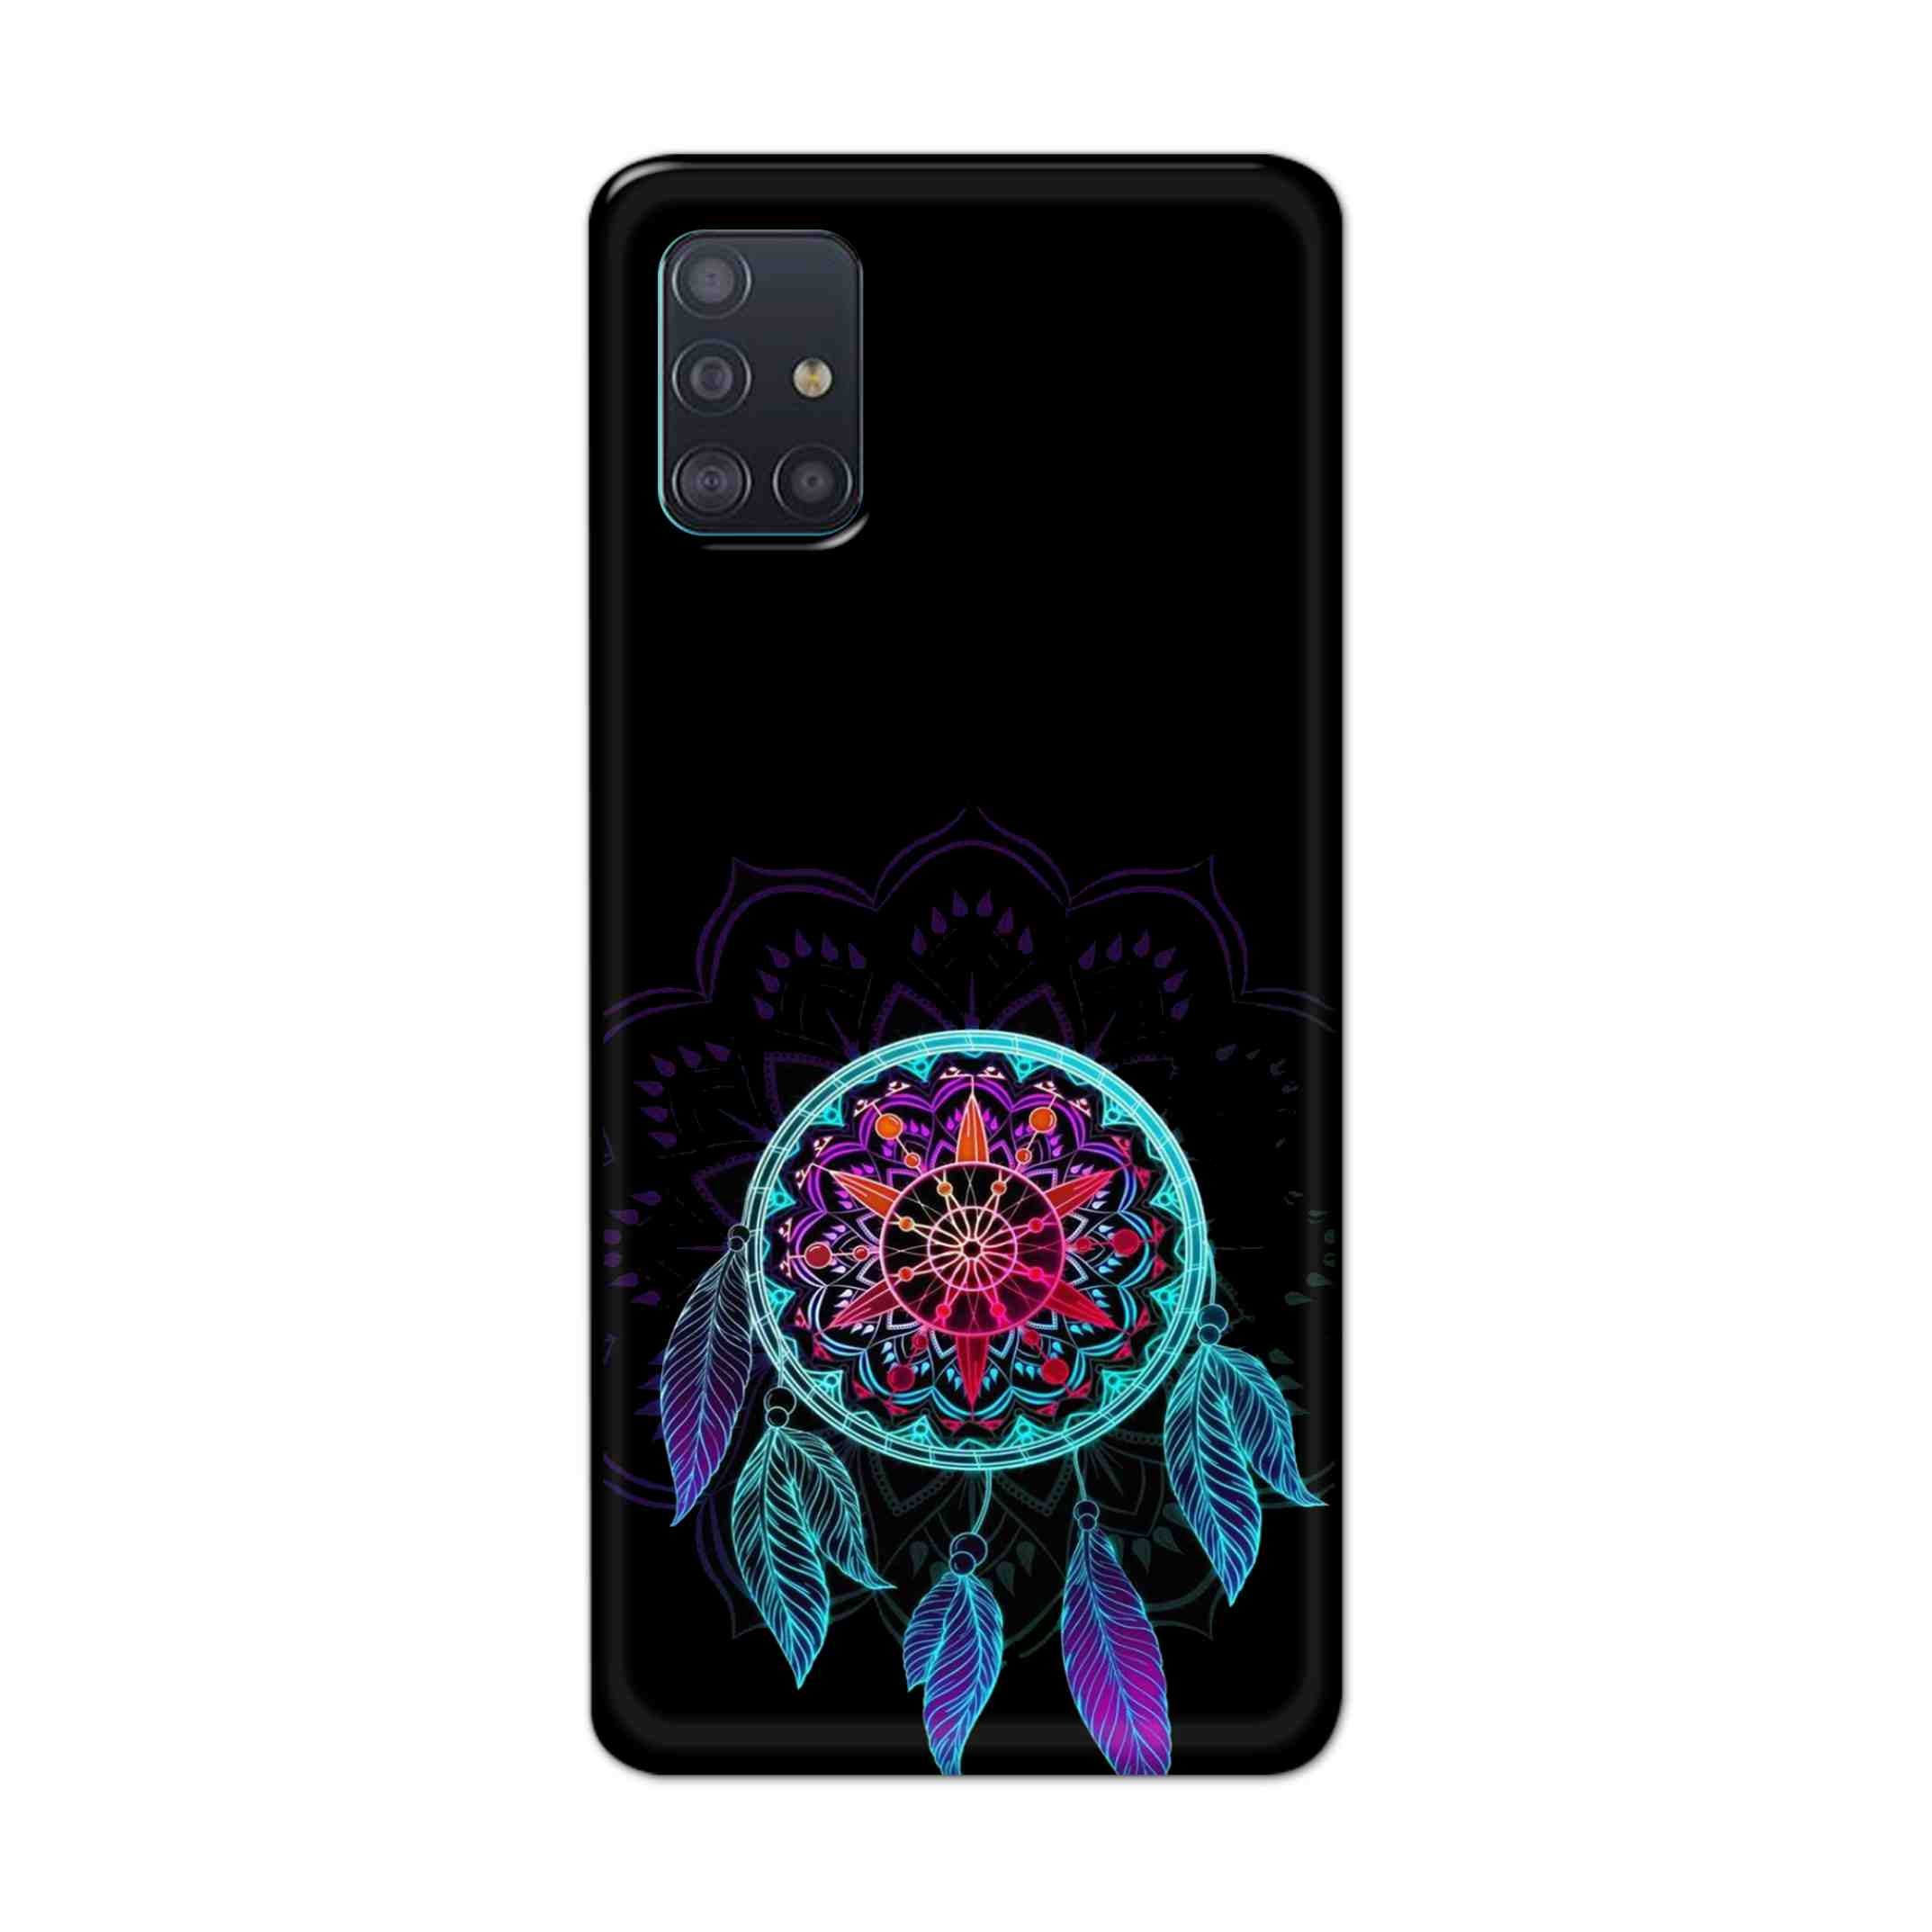 Buy Dream Catcher Hard Back Mobile Phone Case Cover For Samsung Galaxy A71 Online